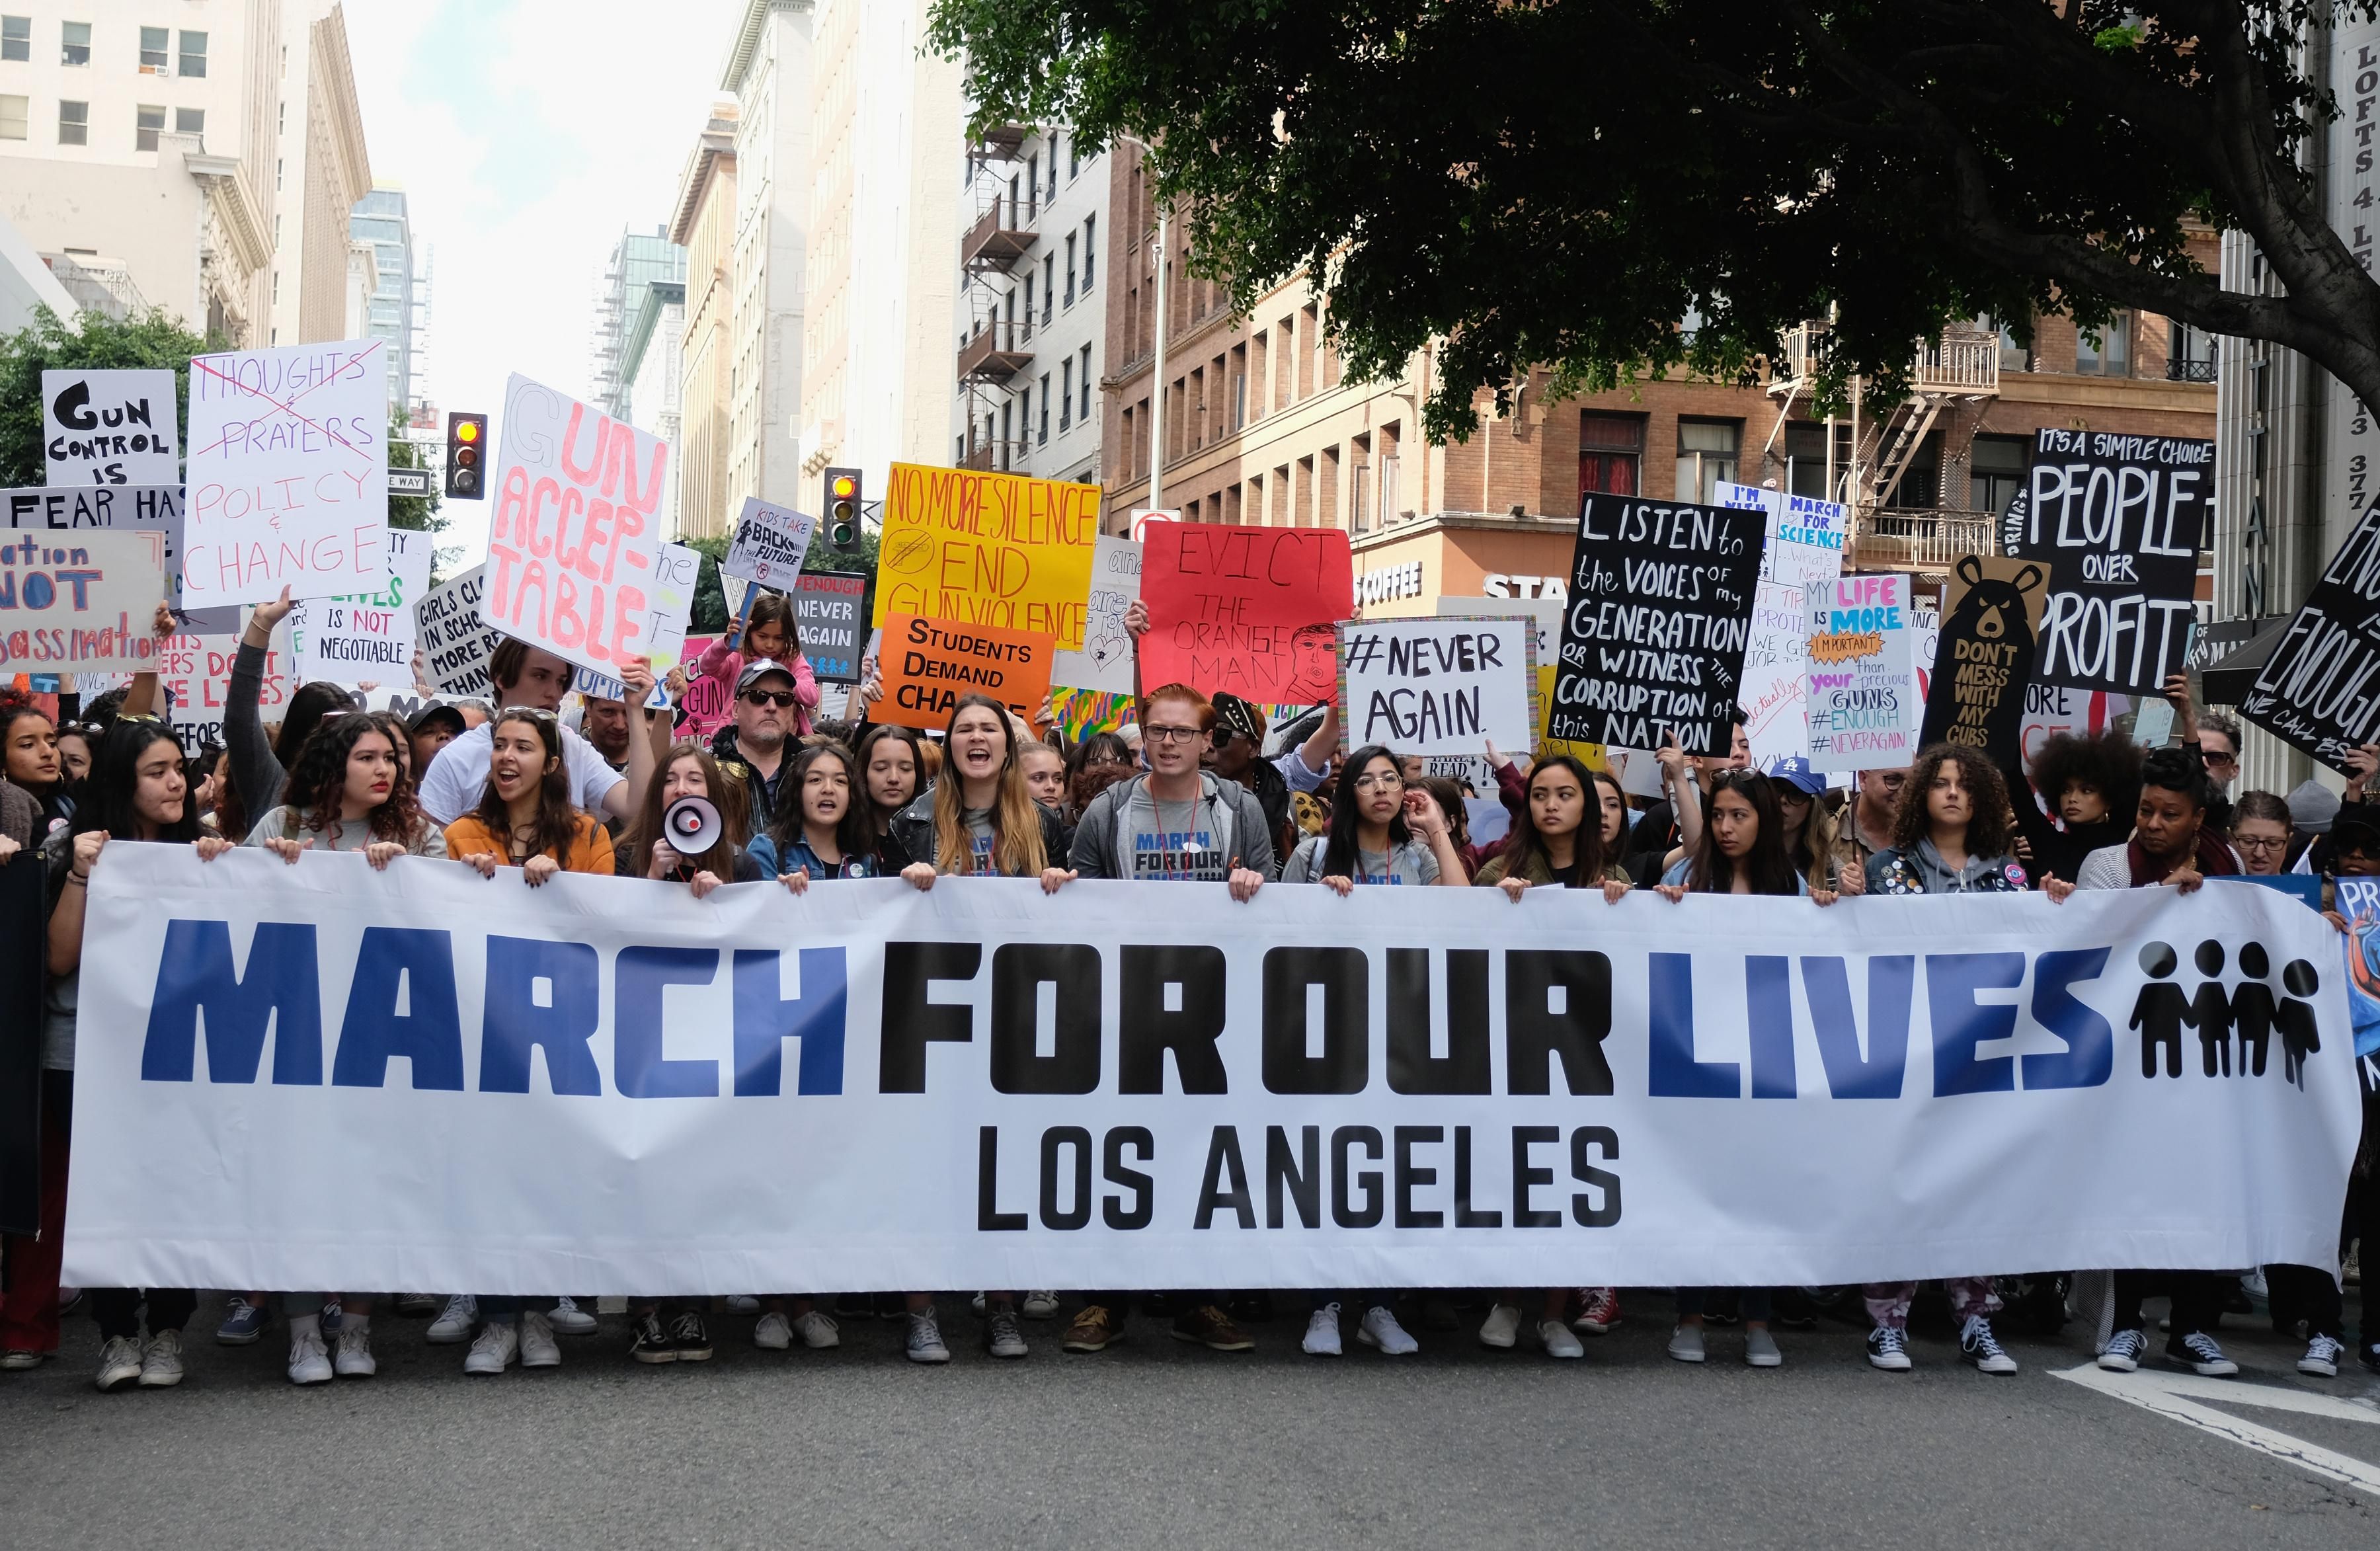 March For Our Lives 2018